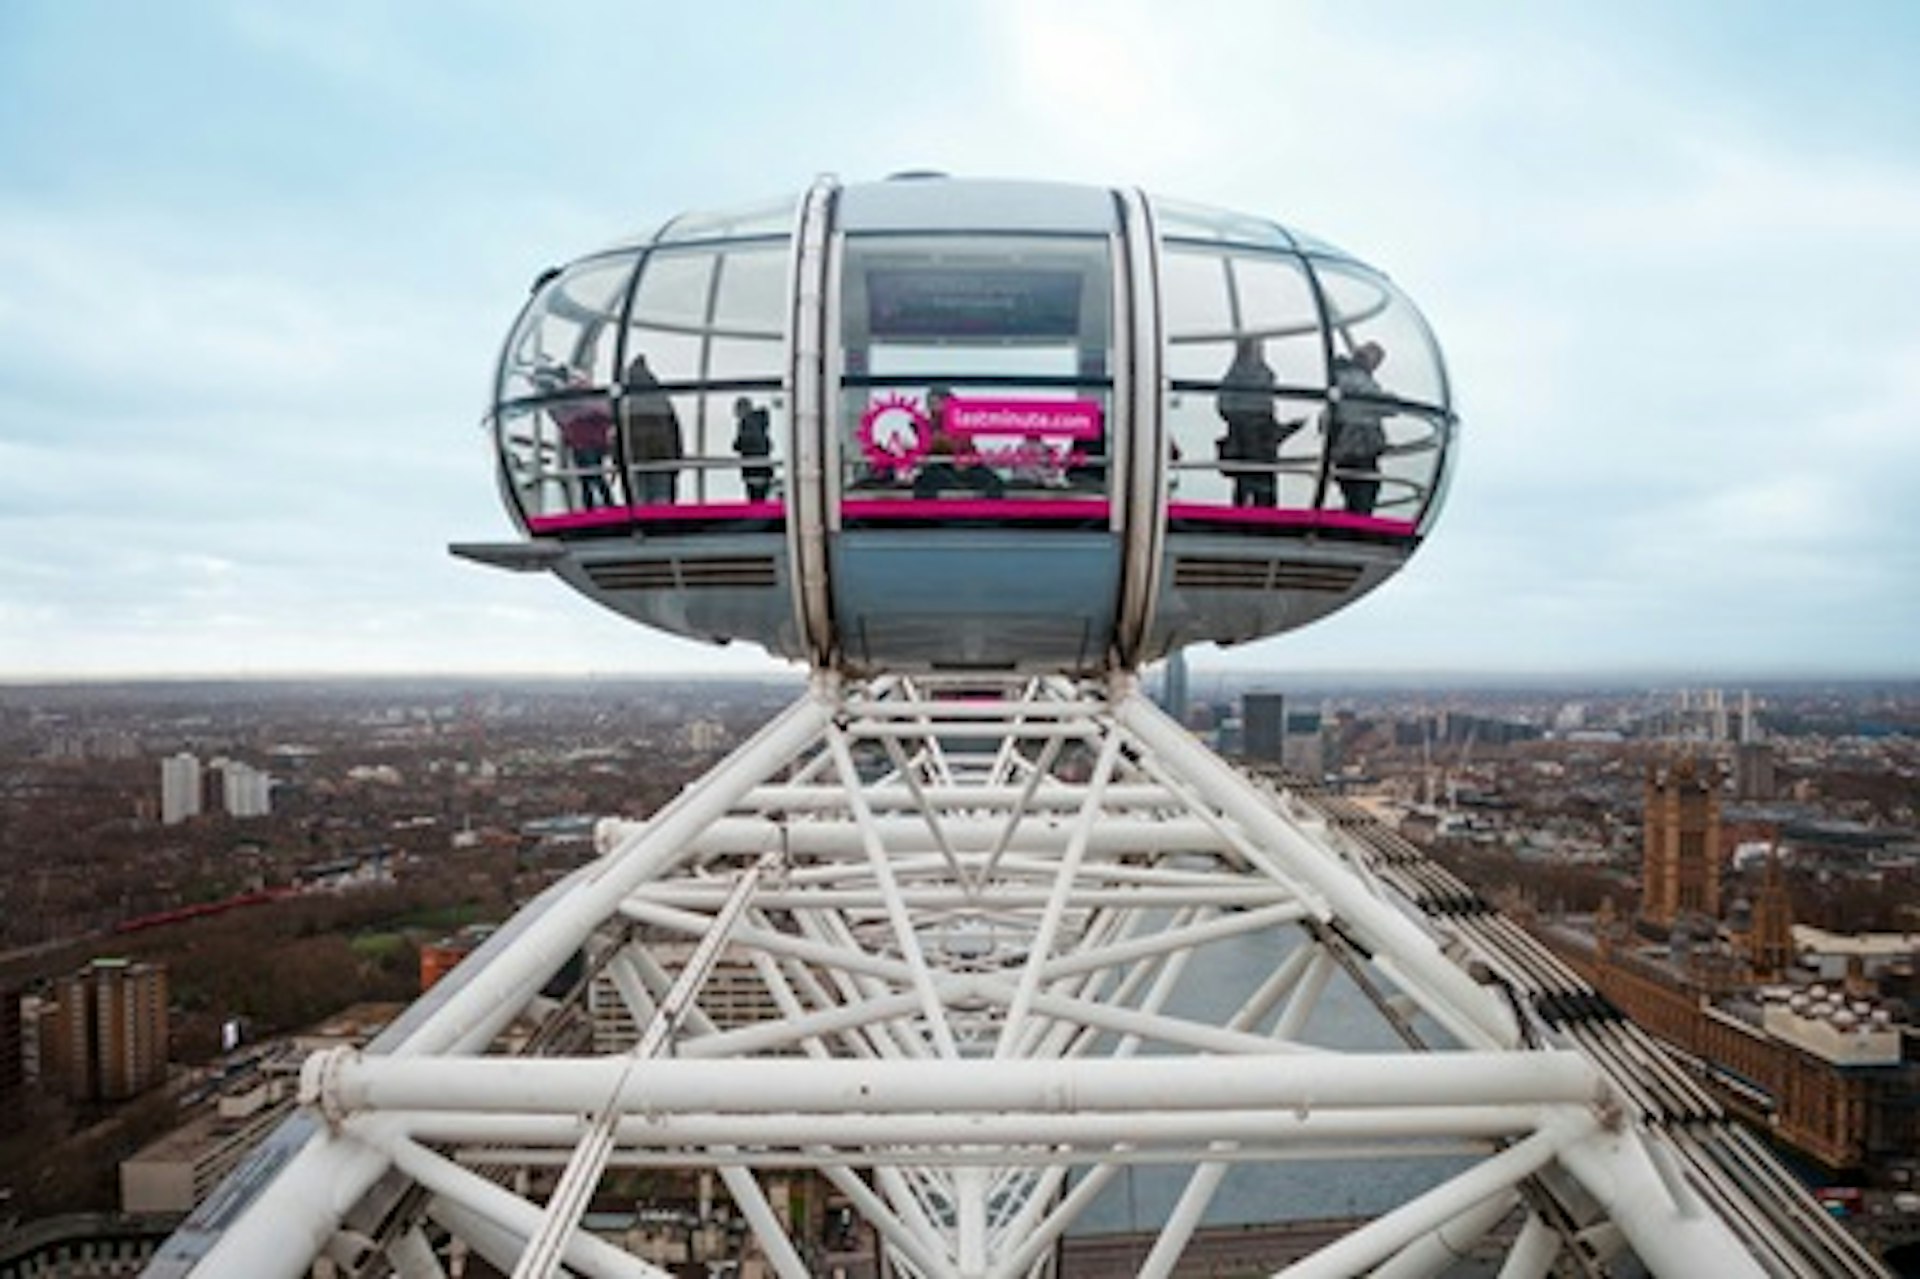 Visit to Lastminute.com London Eye with London Eye River Cruise - Two Adults and One Child 3